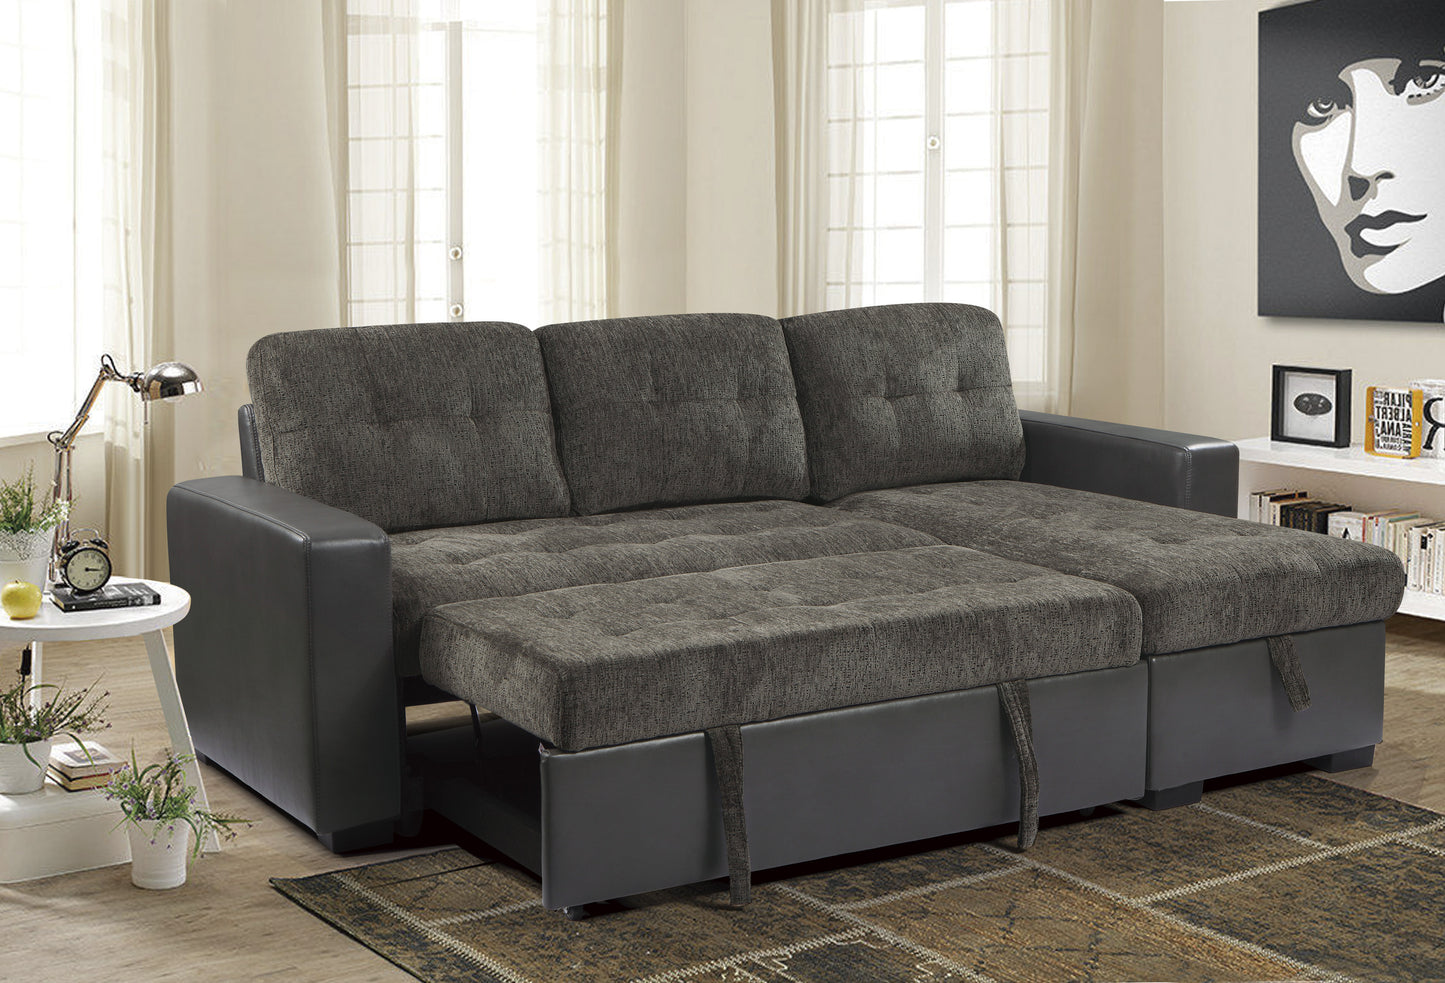 Swallowtail 2-Piece Reversible Sectional with Pull-out Bed and Hidden Storage